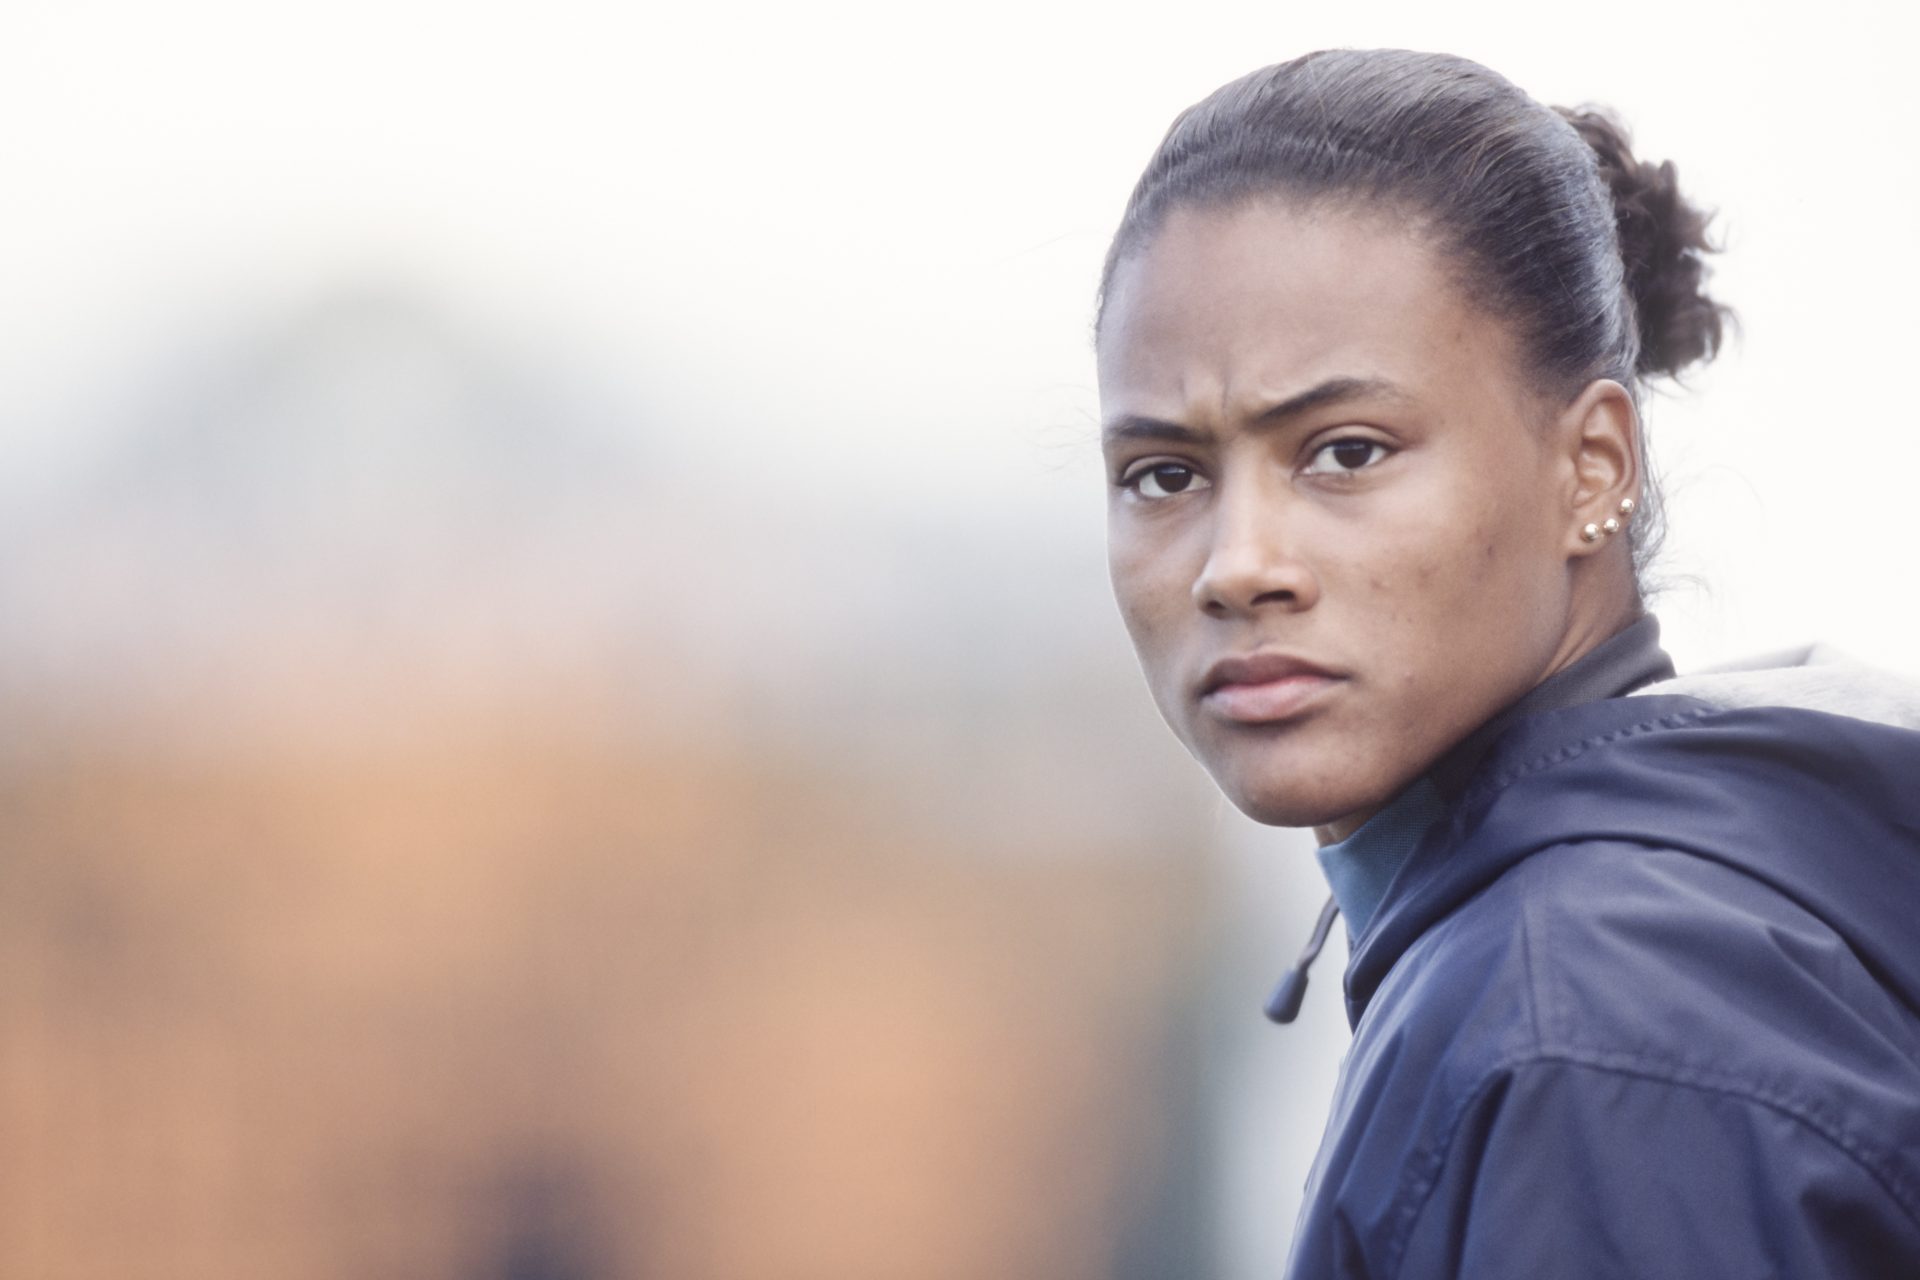 From the podium to the prison: The devastating downfall of Marion Jones